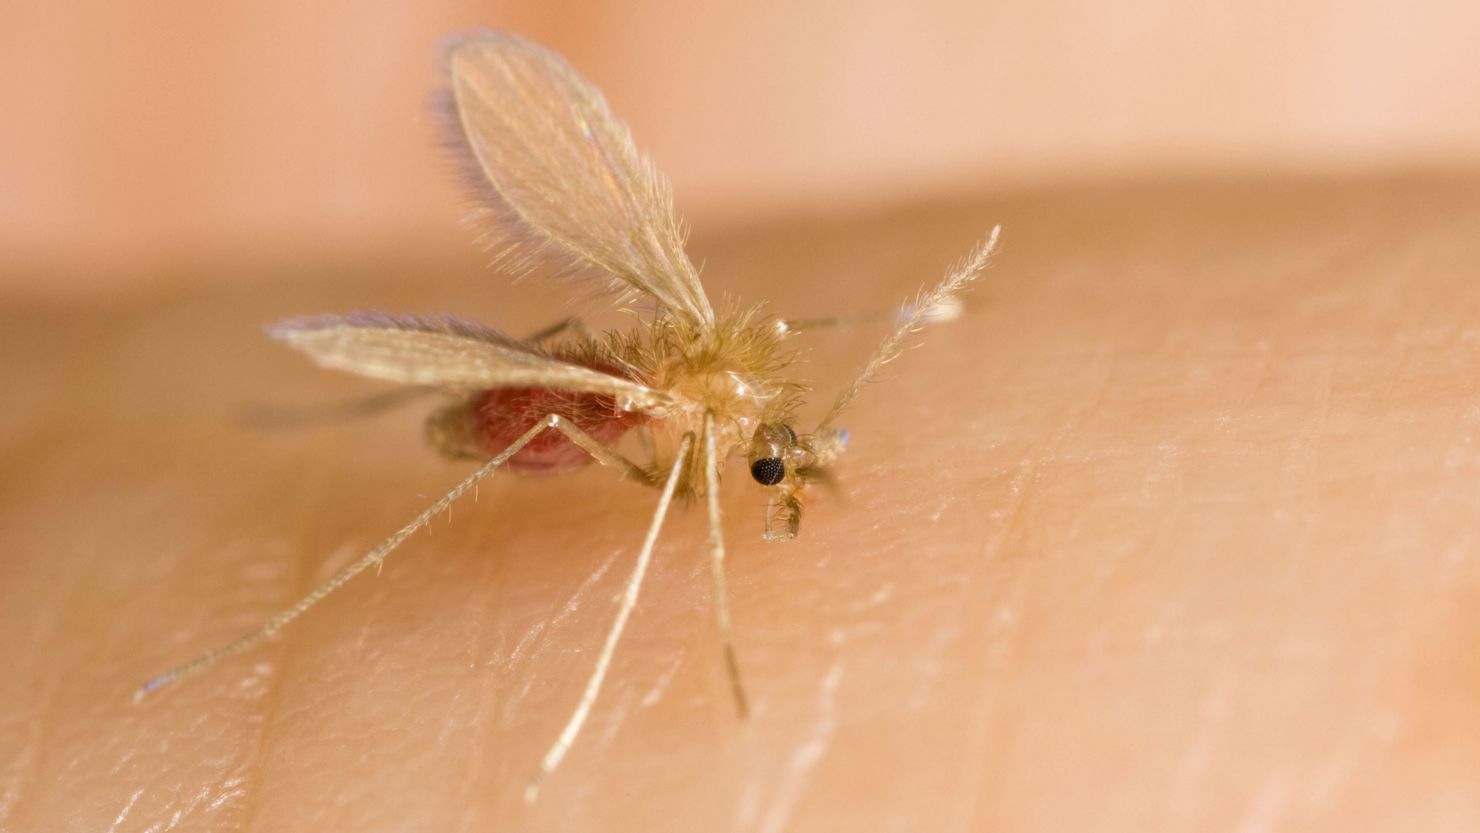 A tropical parasite, passed through the bite of a sand fly, is